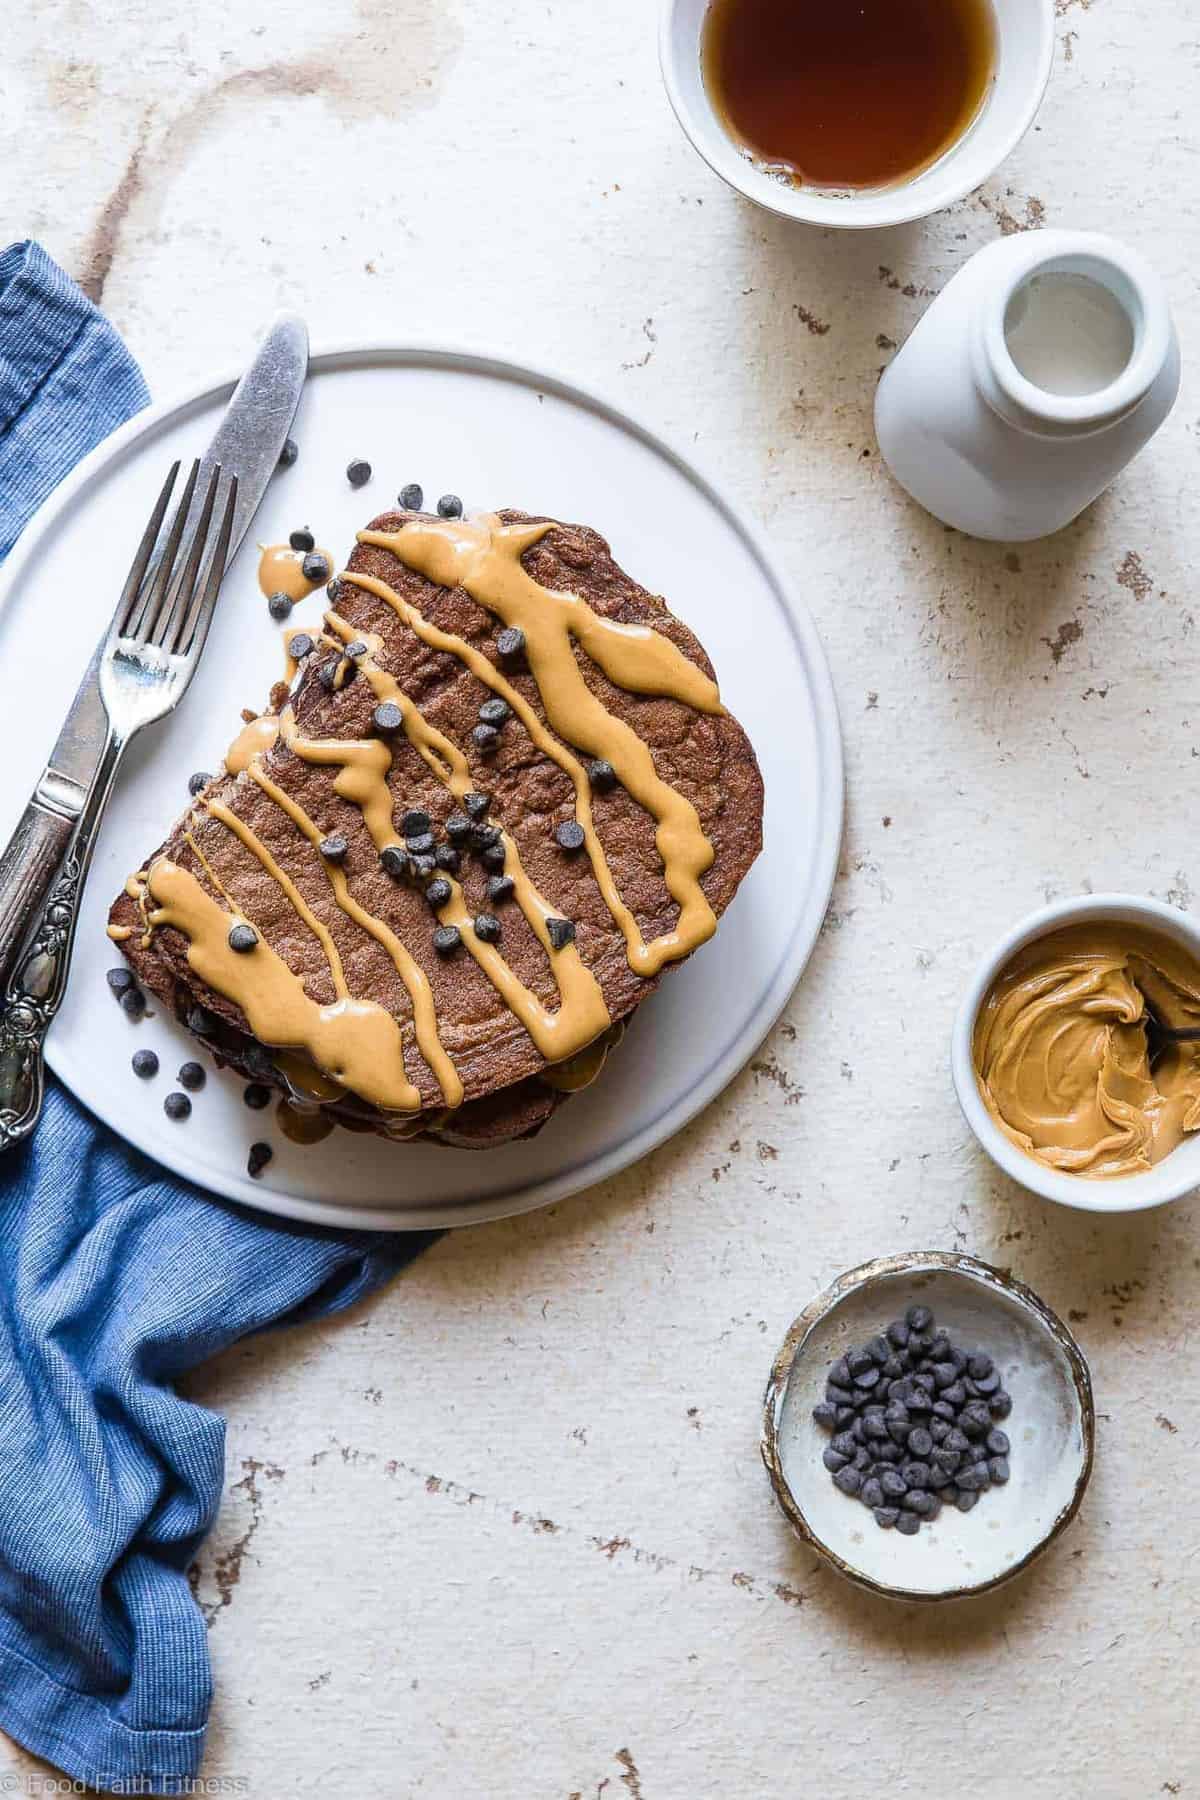 Chocolate Peanut Butter Healthy High Protein French Toast - Loaded with chocolate peanut butter goodness and 32g of protein! SO easy to make and has a gluten free and paleo friendly option! Your new favorite breakfast to keep you FULL! | #Foodfaithfitness | #Glutenfree #Healthy #Paleo #Breakfast #FrenchToast